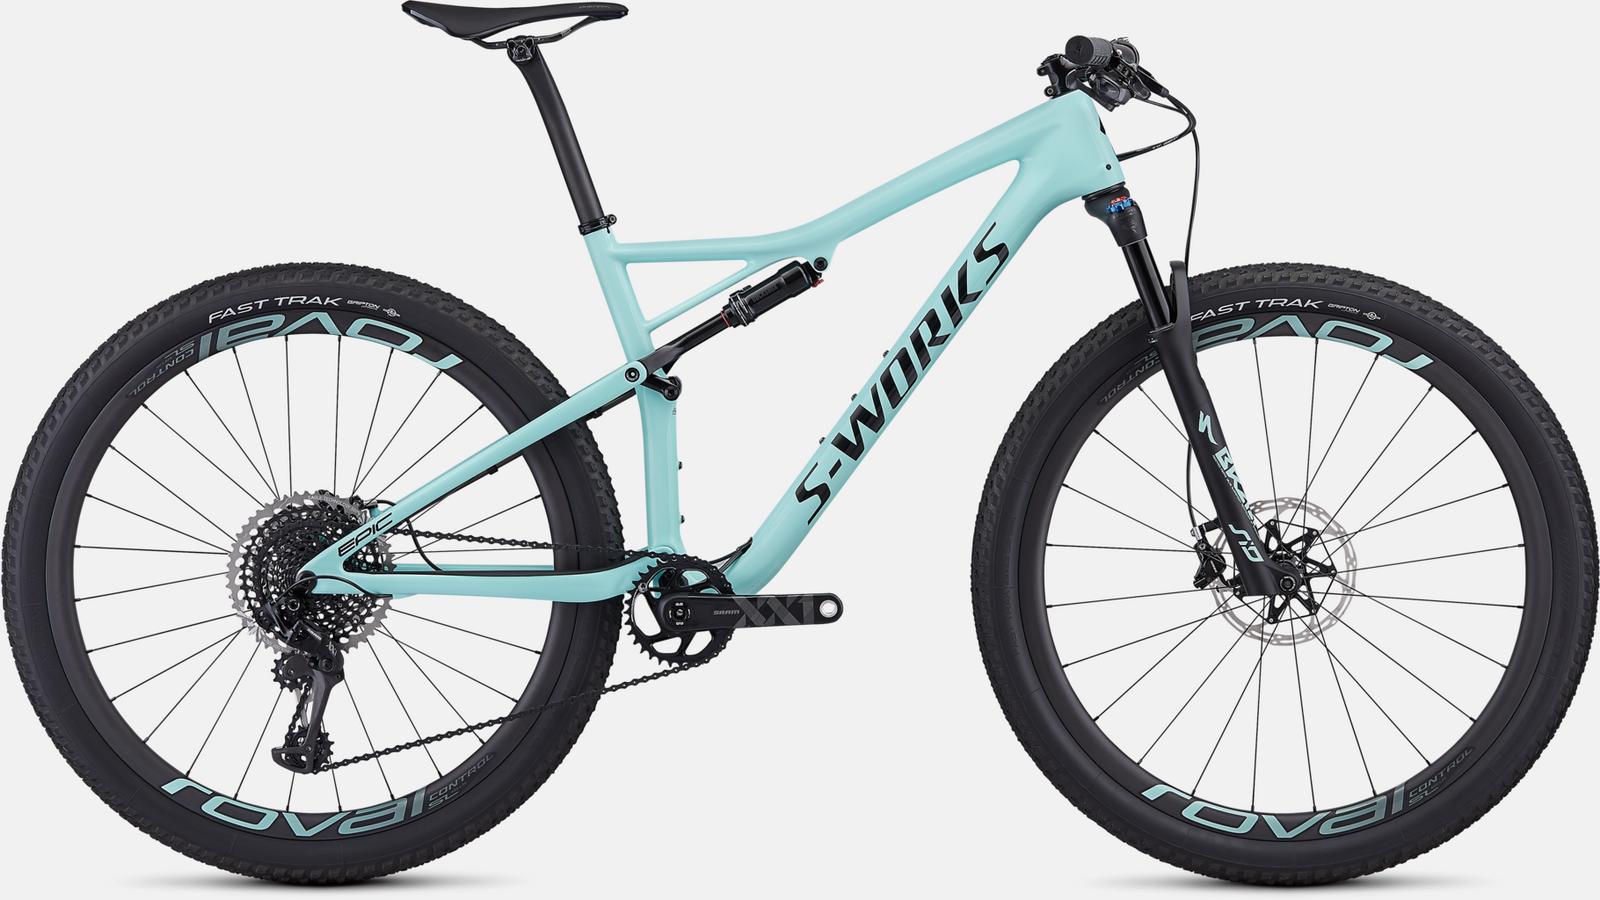 Paint for 2019 Specialized Men's S-Works Epic - Gloss Mint